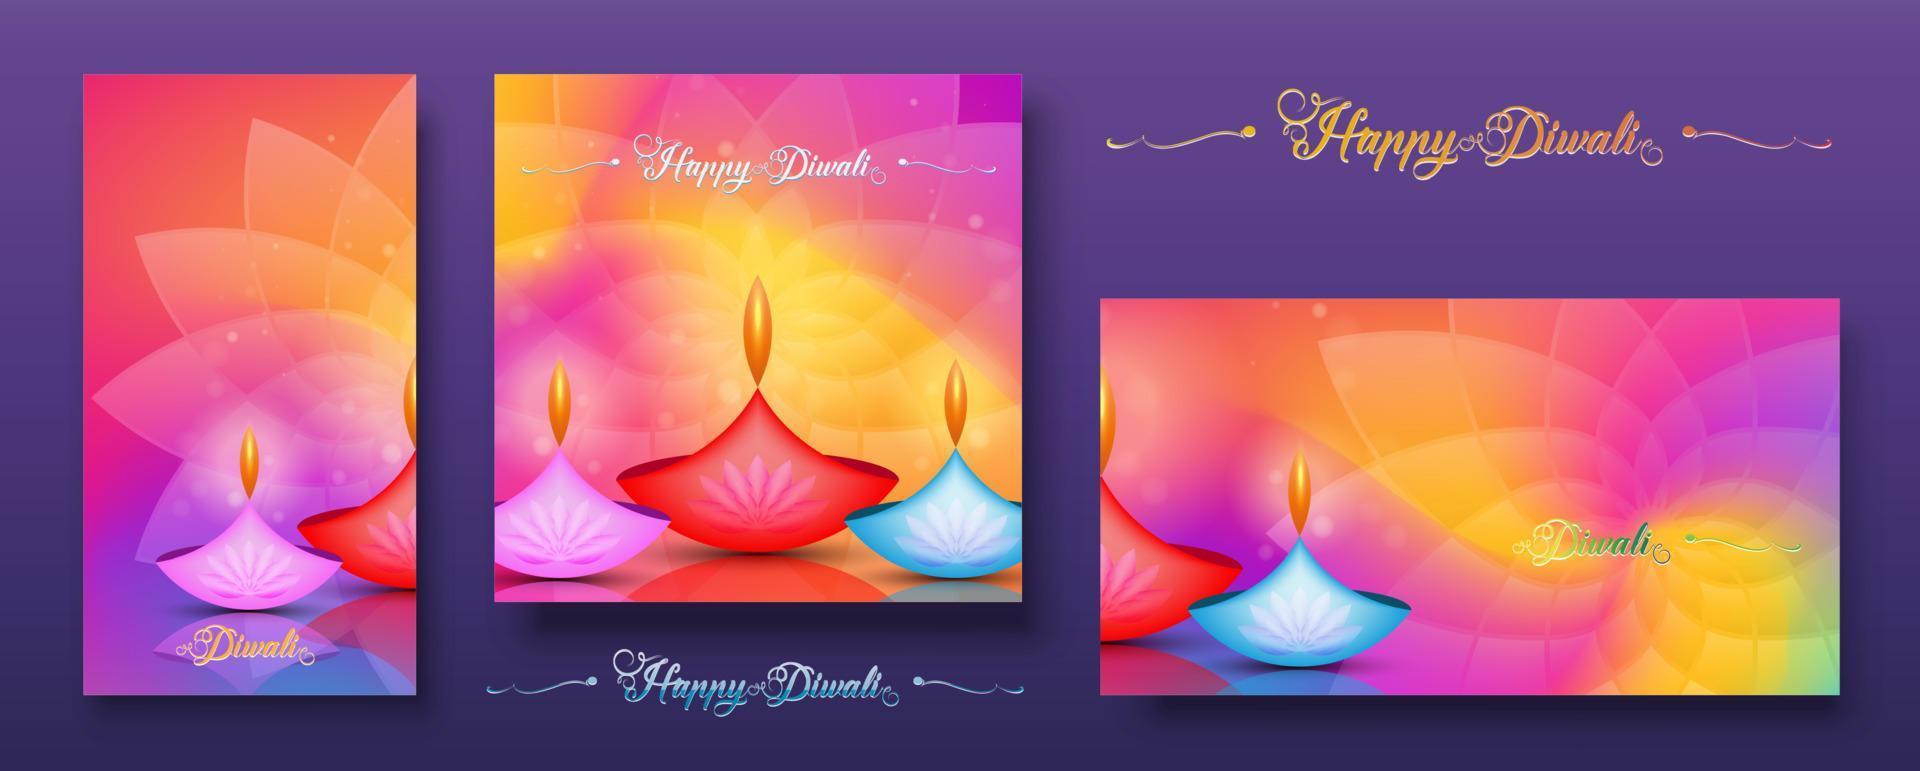 Set colorful card, Happy Diwali Festival of Lights India Celebration. Graphic banner design of Indian Lotus Diya Oil Lamps, Modern Design in vibrant colors. Vector art style, gradient color background